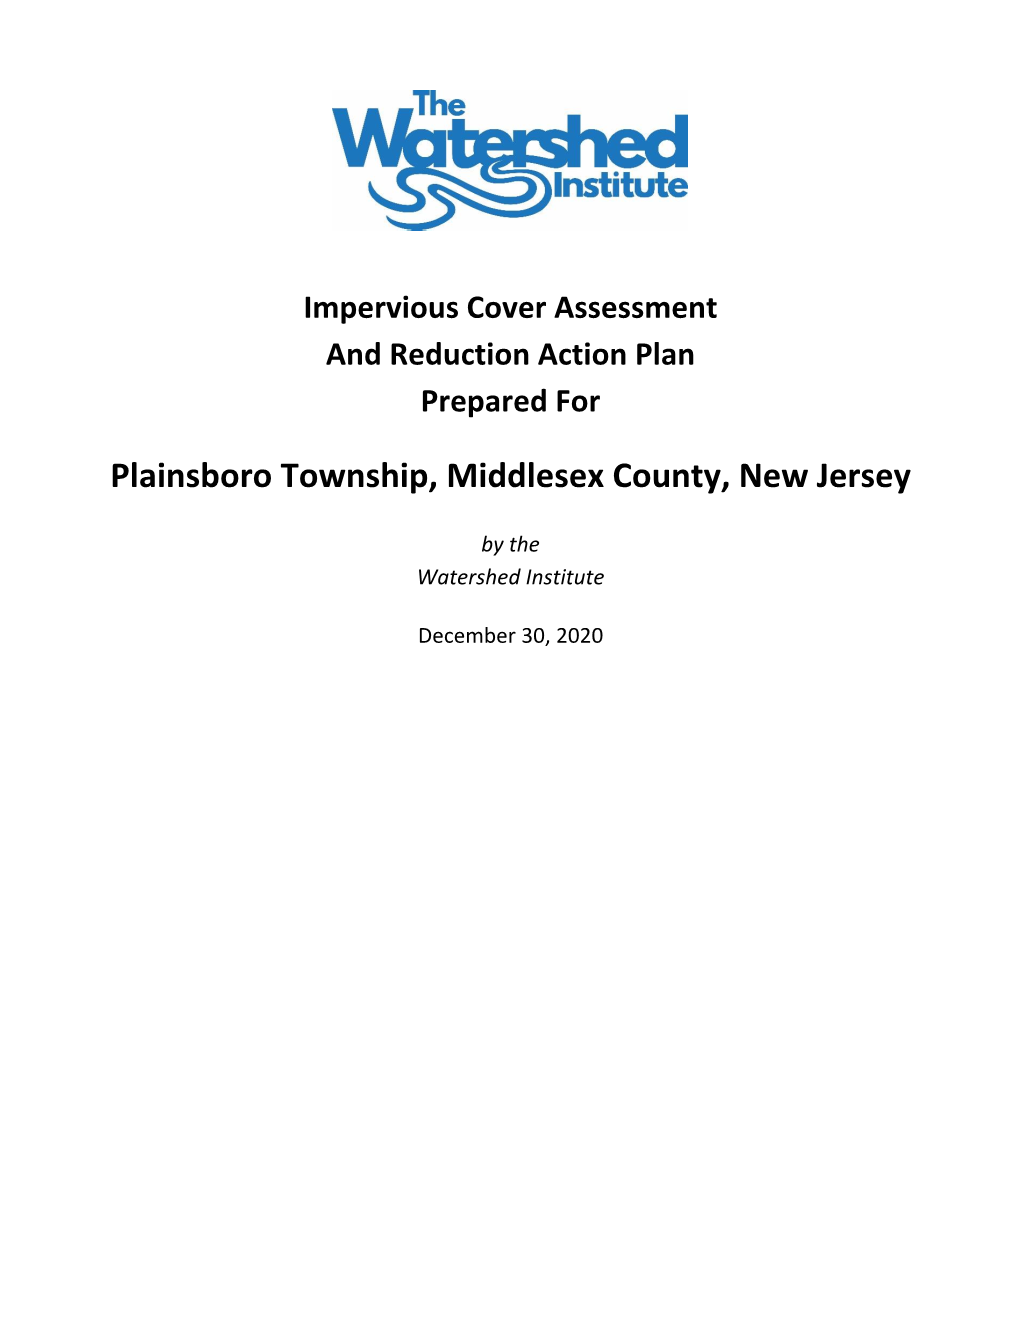 Plainsboro Township, Middlesex County, New Jersey